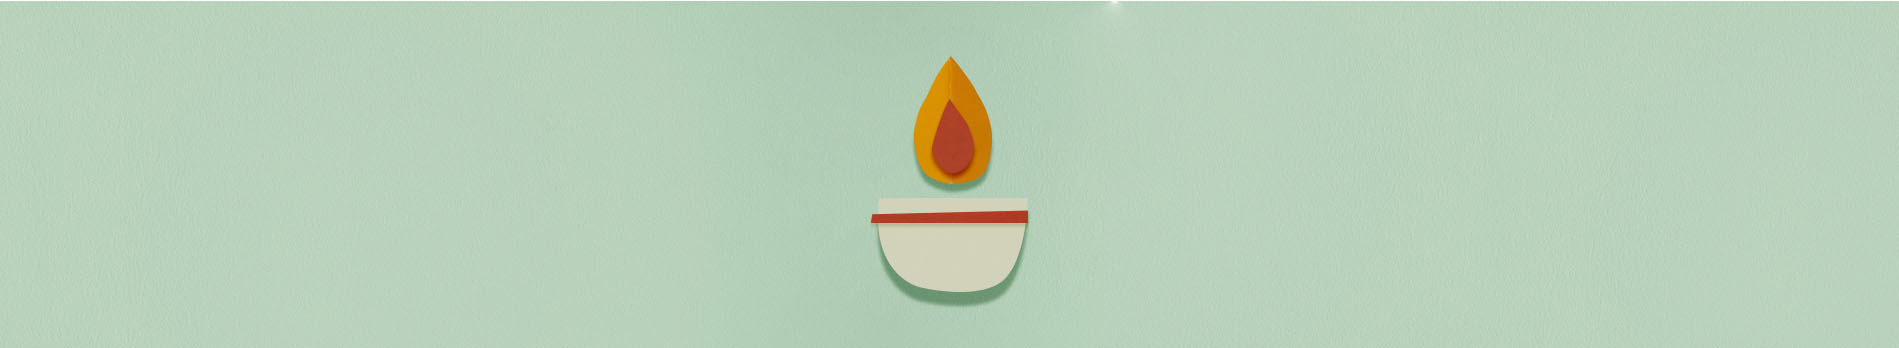 A paper cut candle shape on a mind colored background